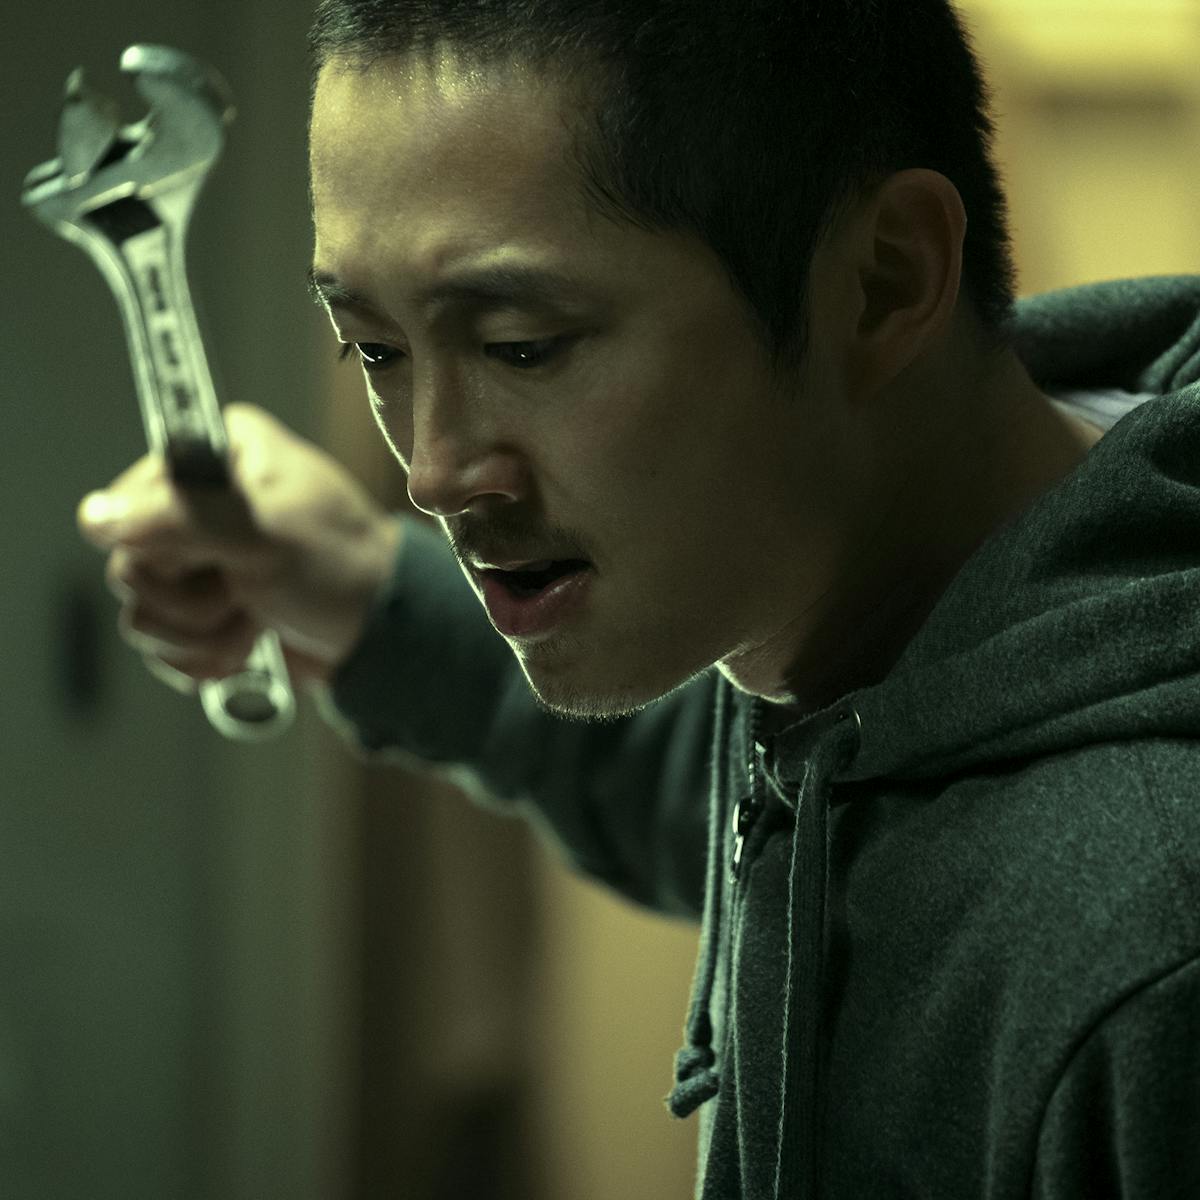 Danny (Steven Yeun) holds a wrench up, with a ferocious expression.